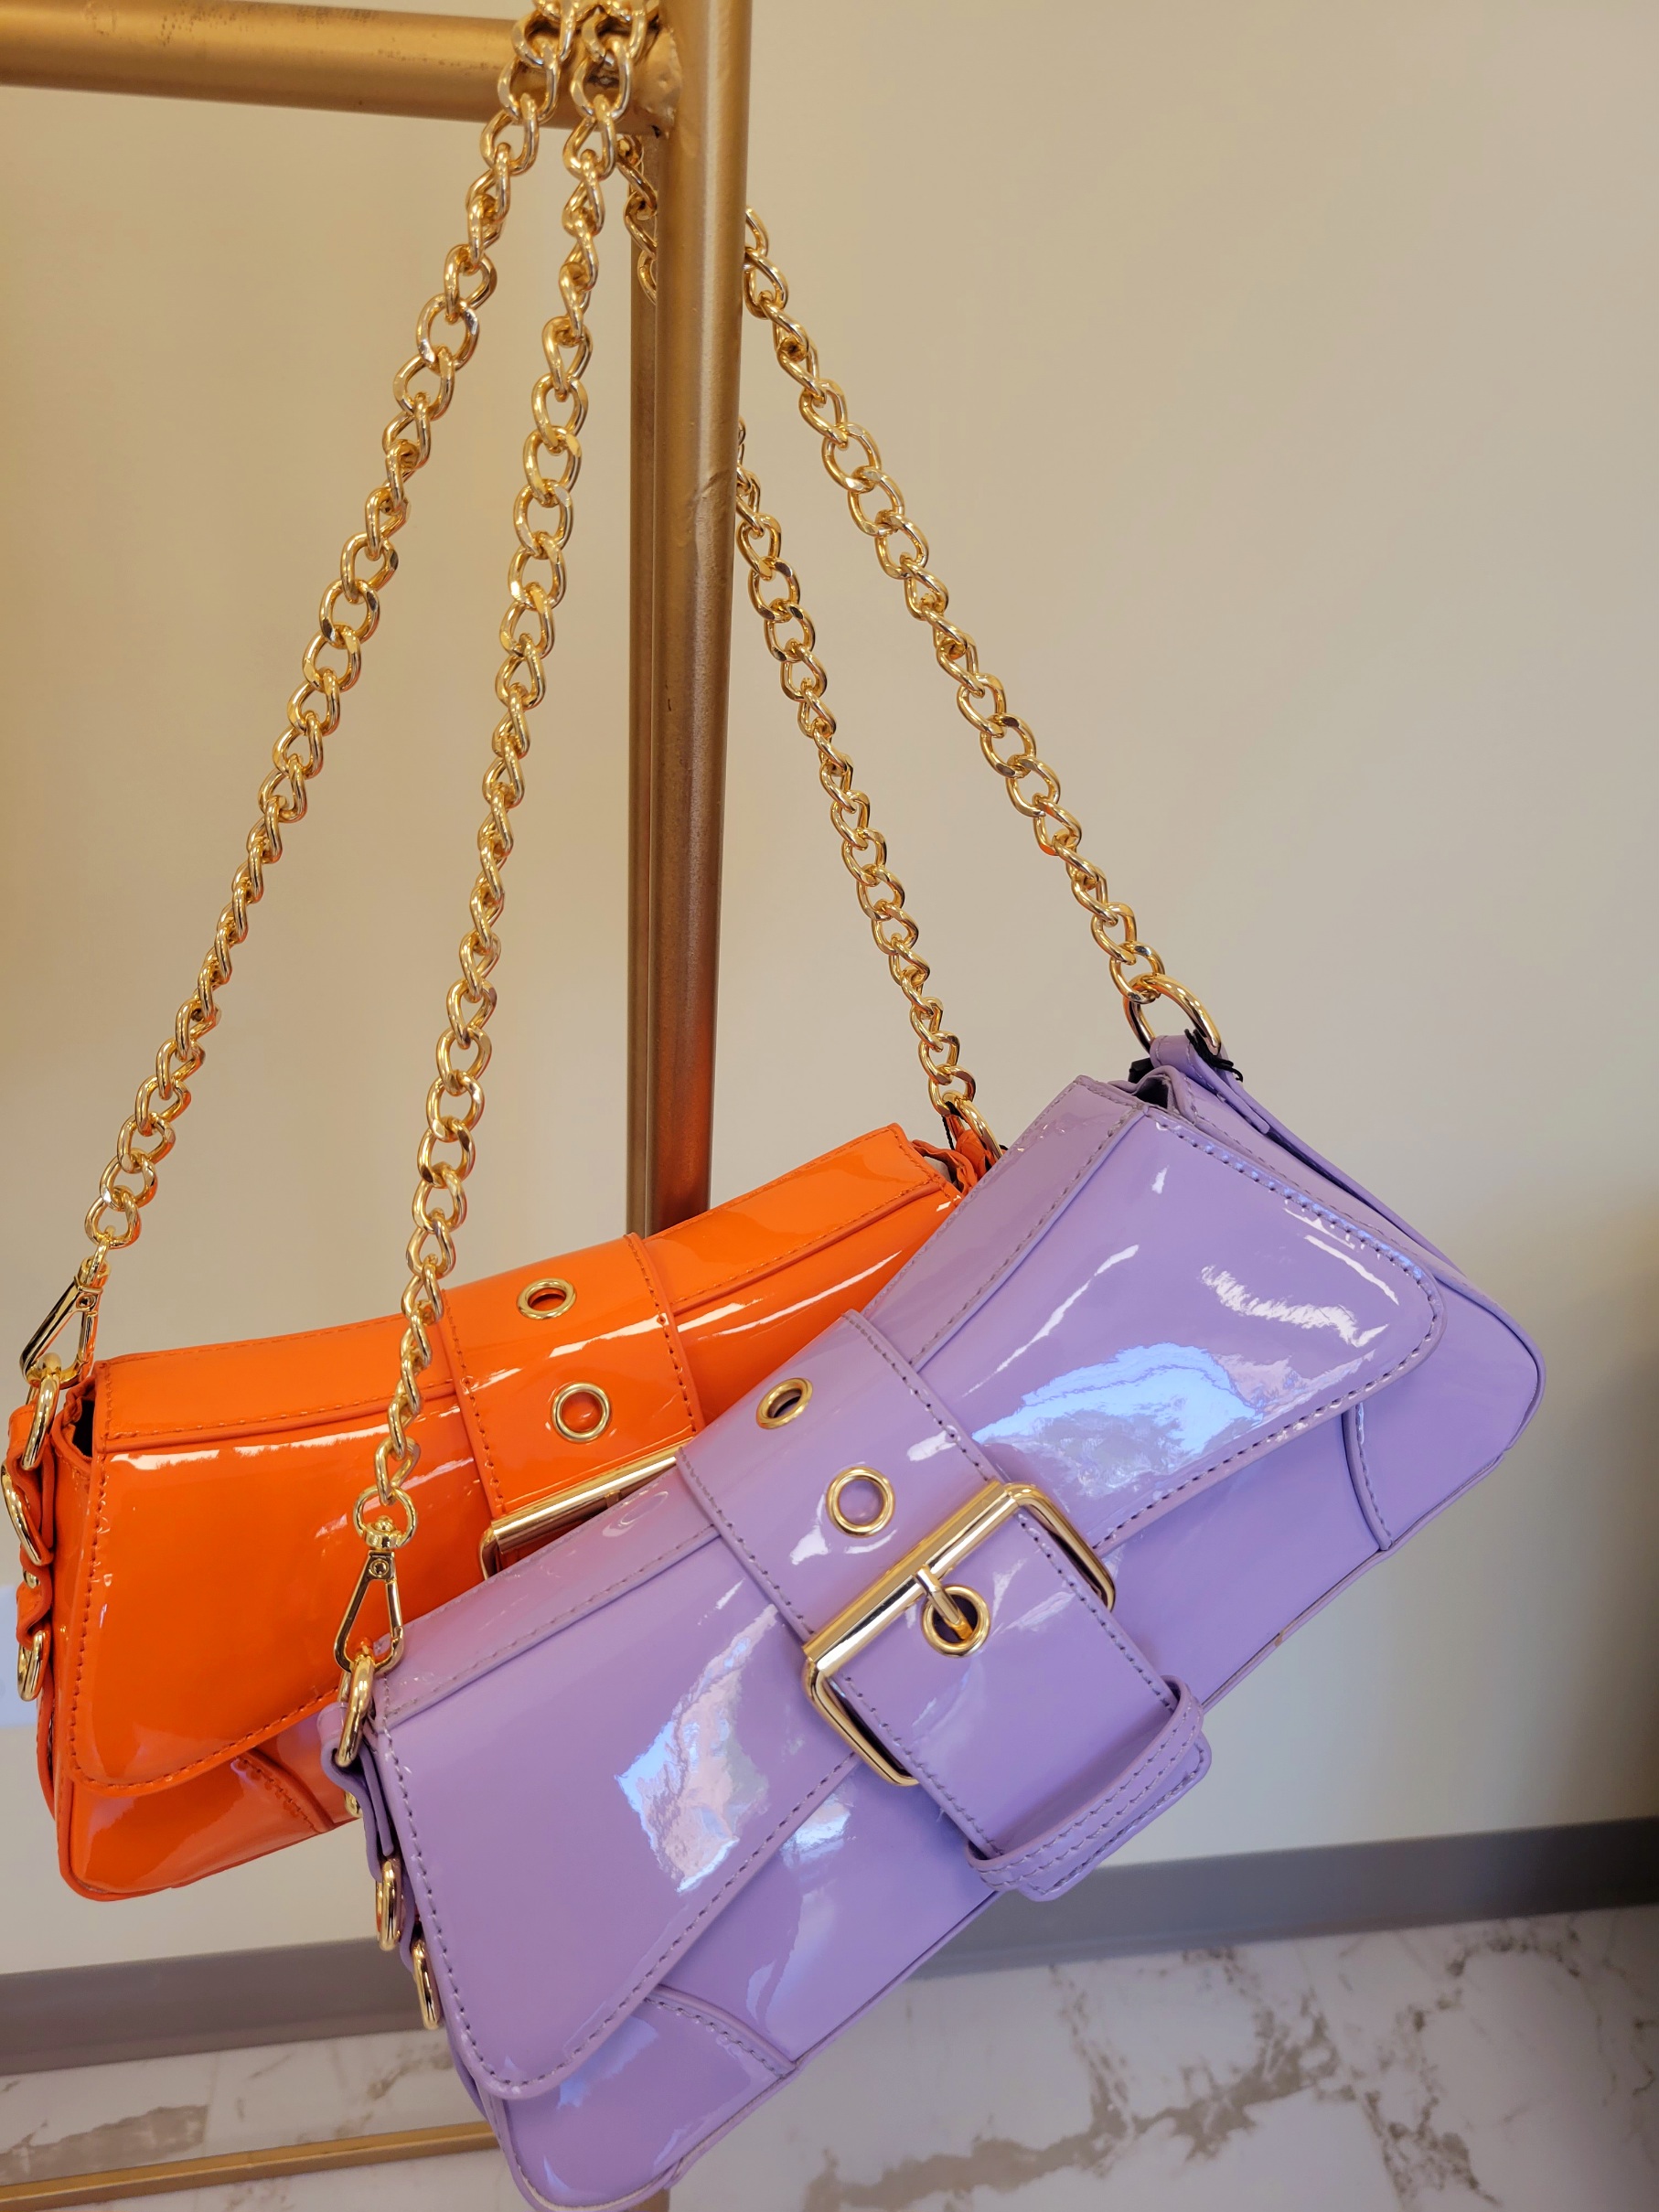 The Genisis Collection purses